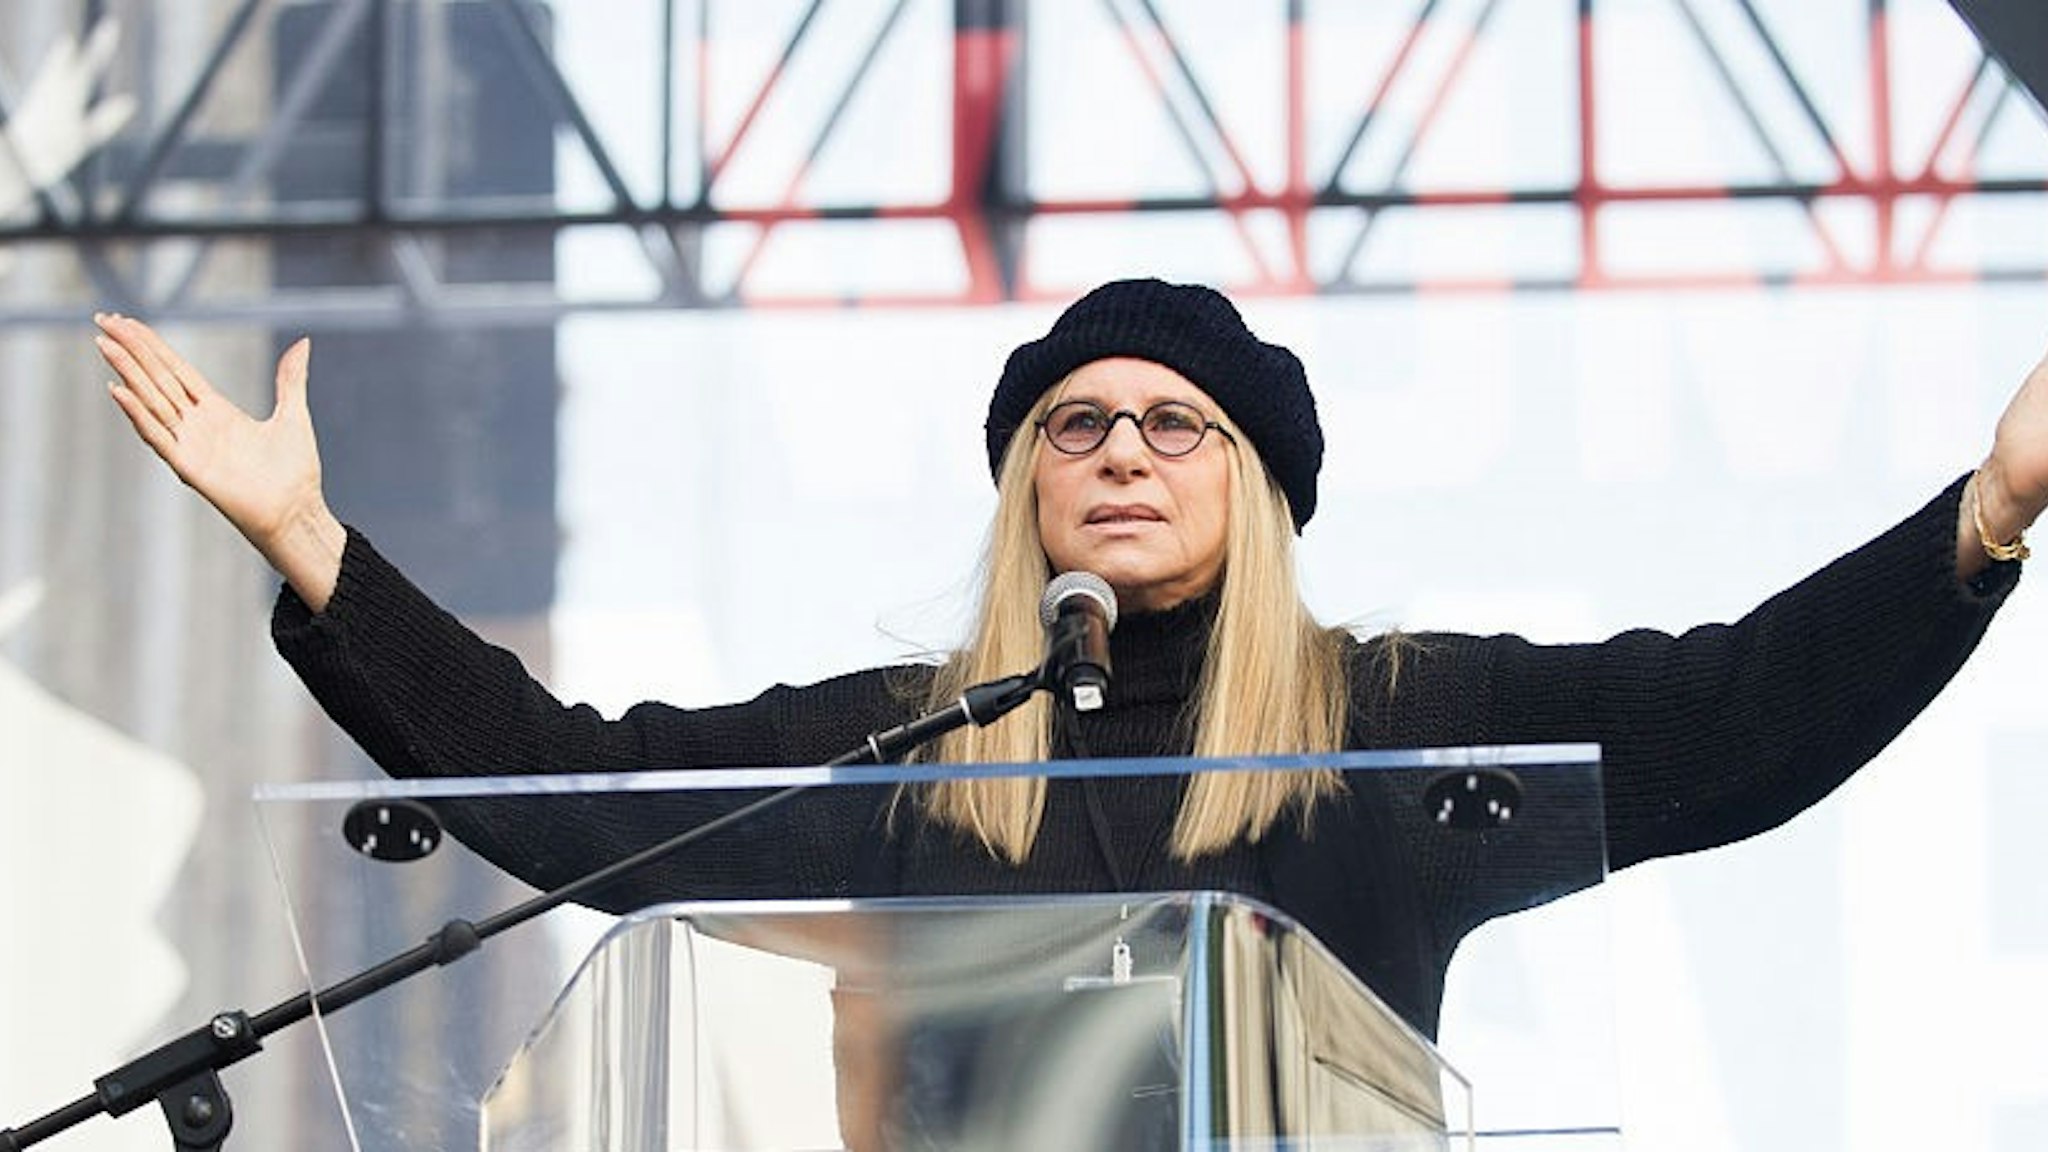 Actress Barbra Streisand speaks onstage at the women's march in Los Angeles on January 21, 2017 in Los Angeles, California. (Photo by Emma McIntyre/Getty Images)